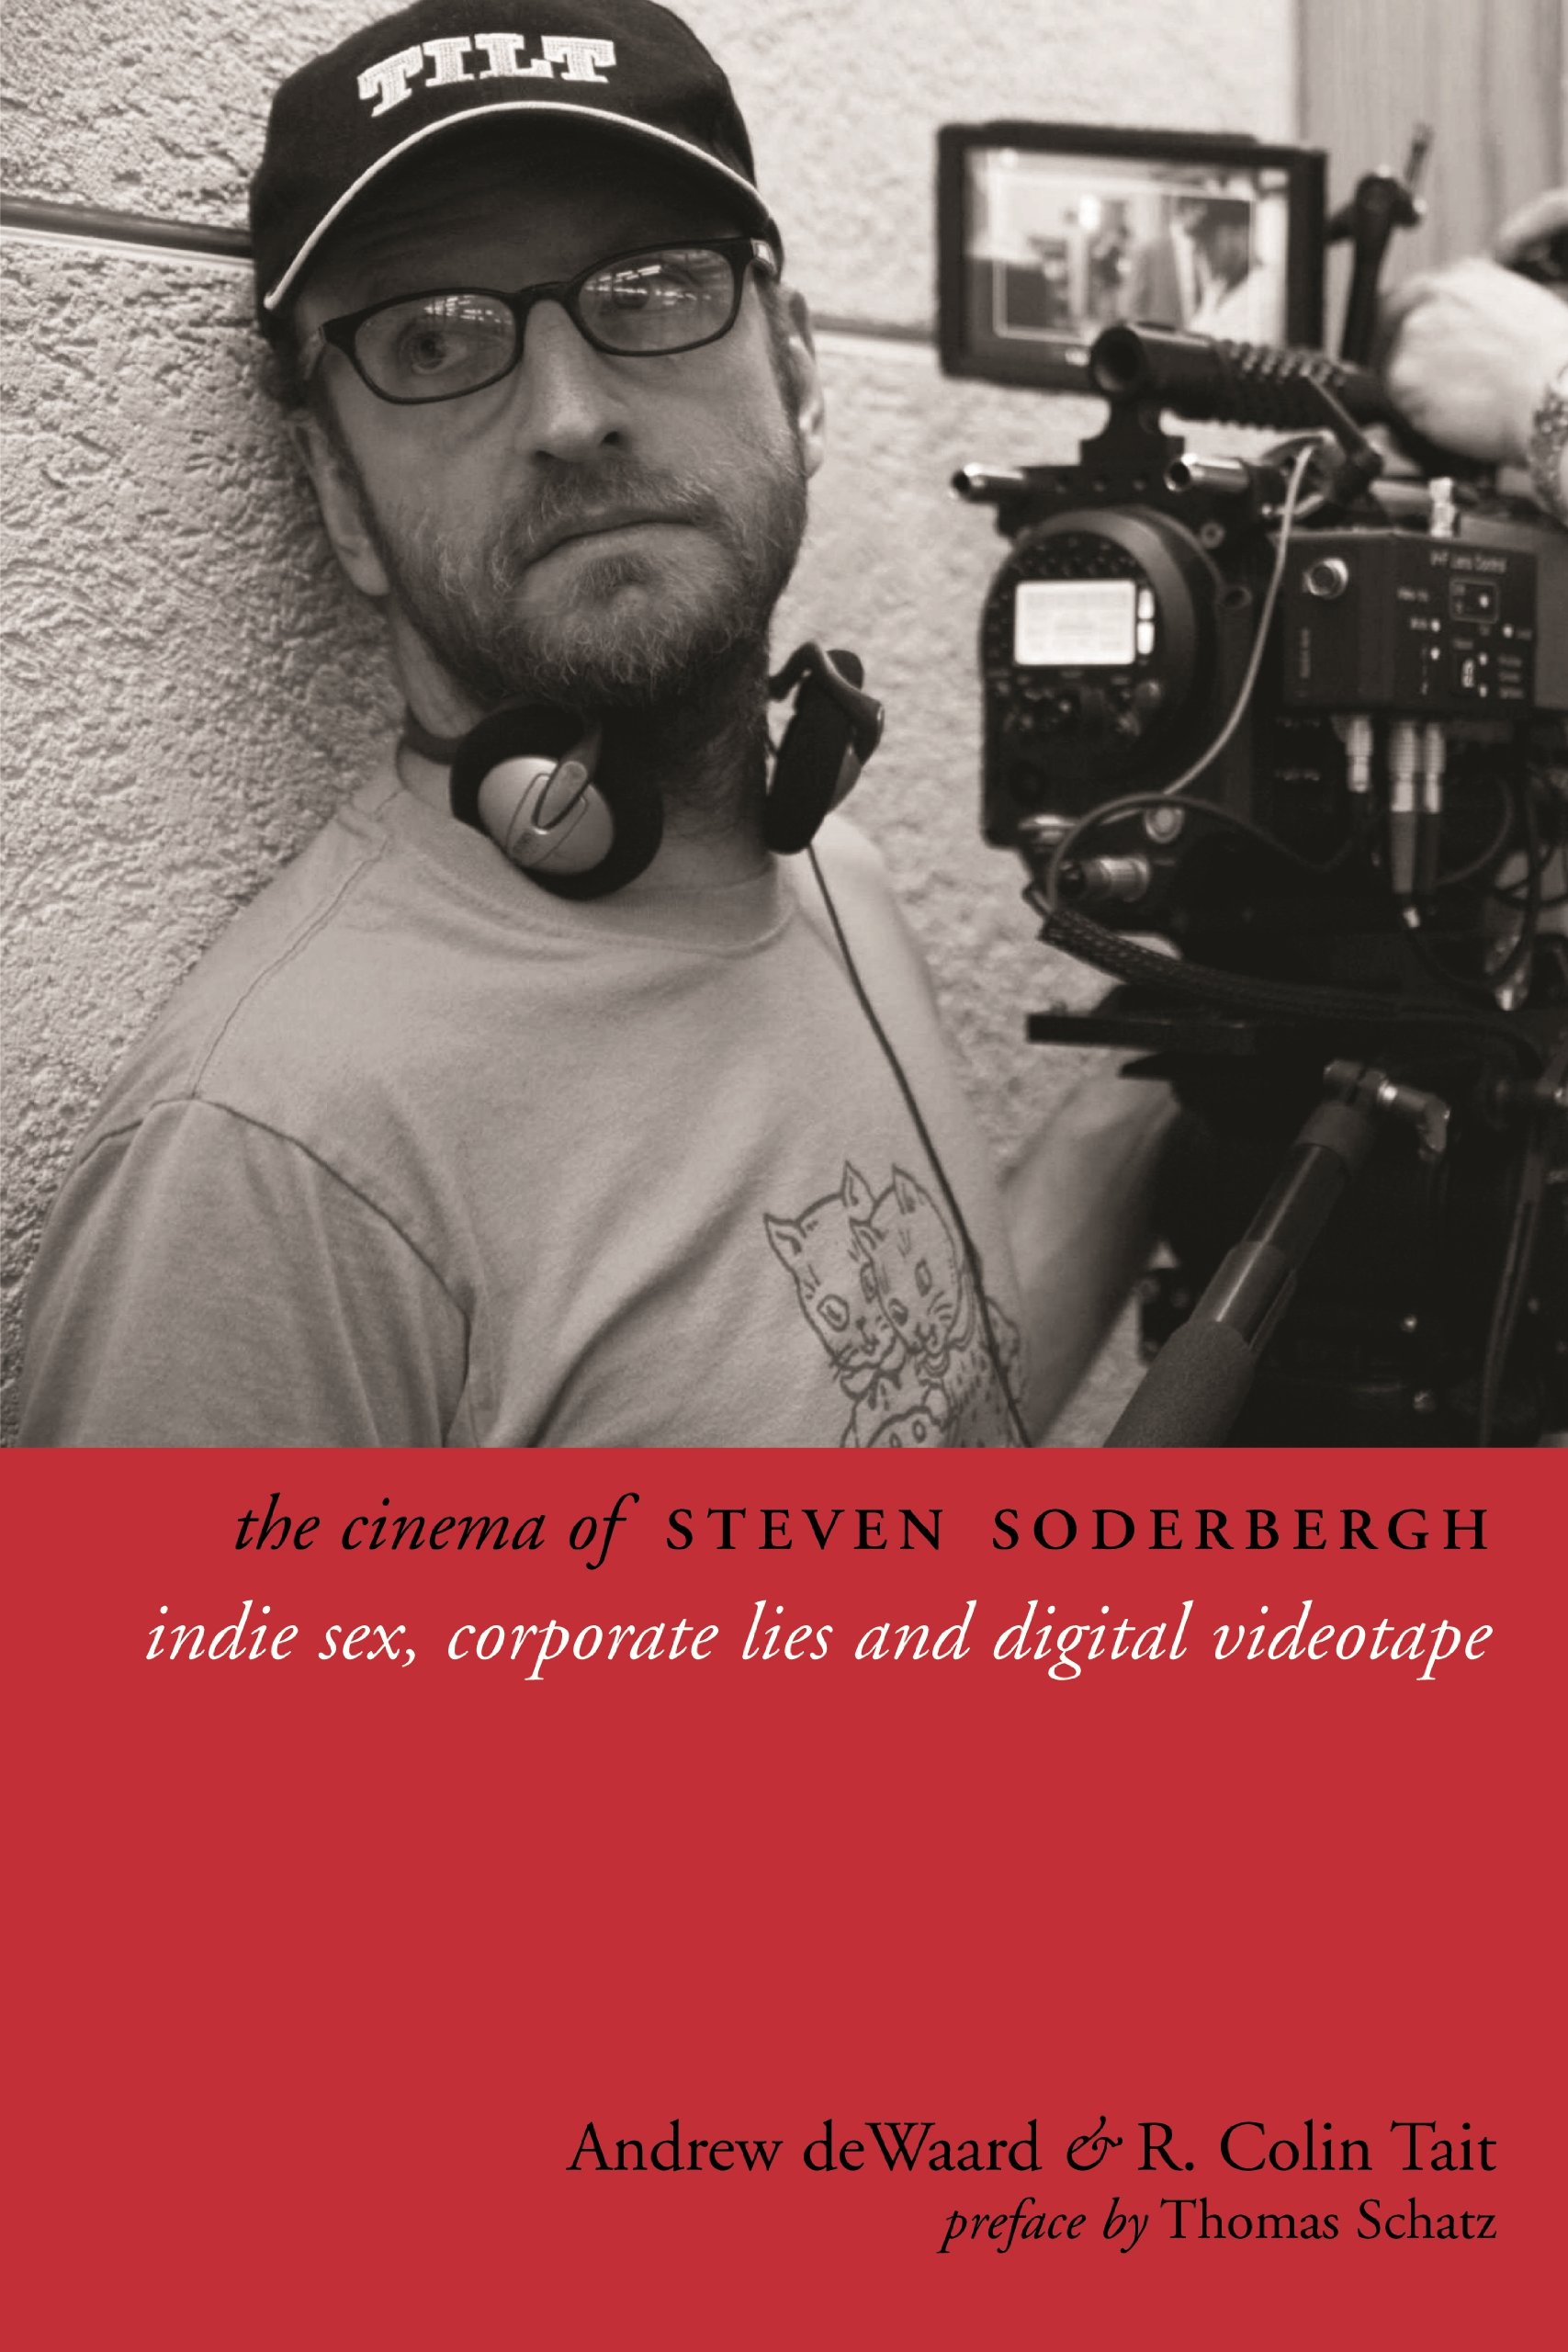 book cover featuring a black and white photo of steven soderbergh wearing a baseball cap, holdinga camera, and leaning against a wall